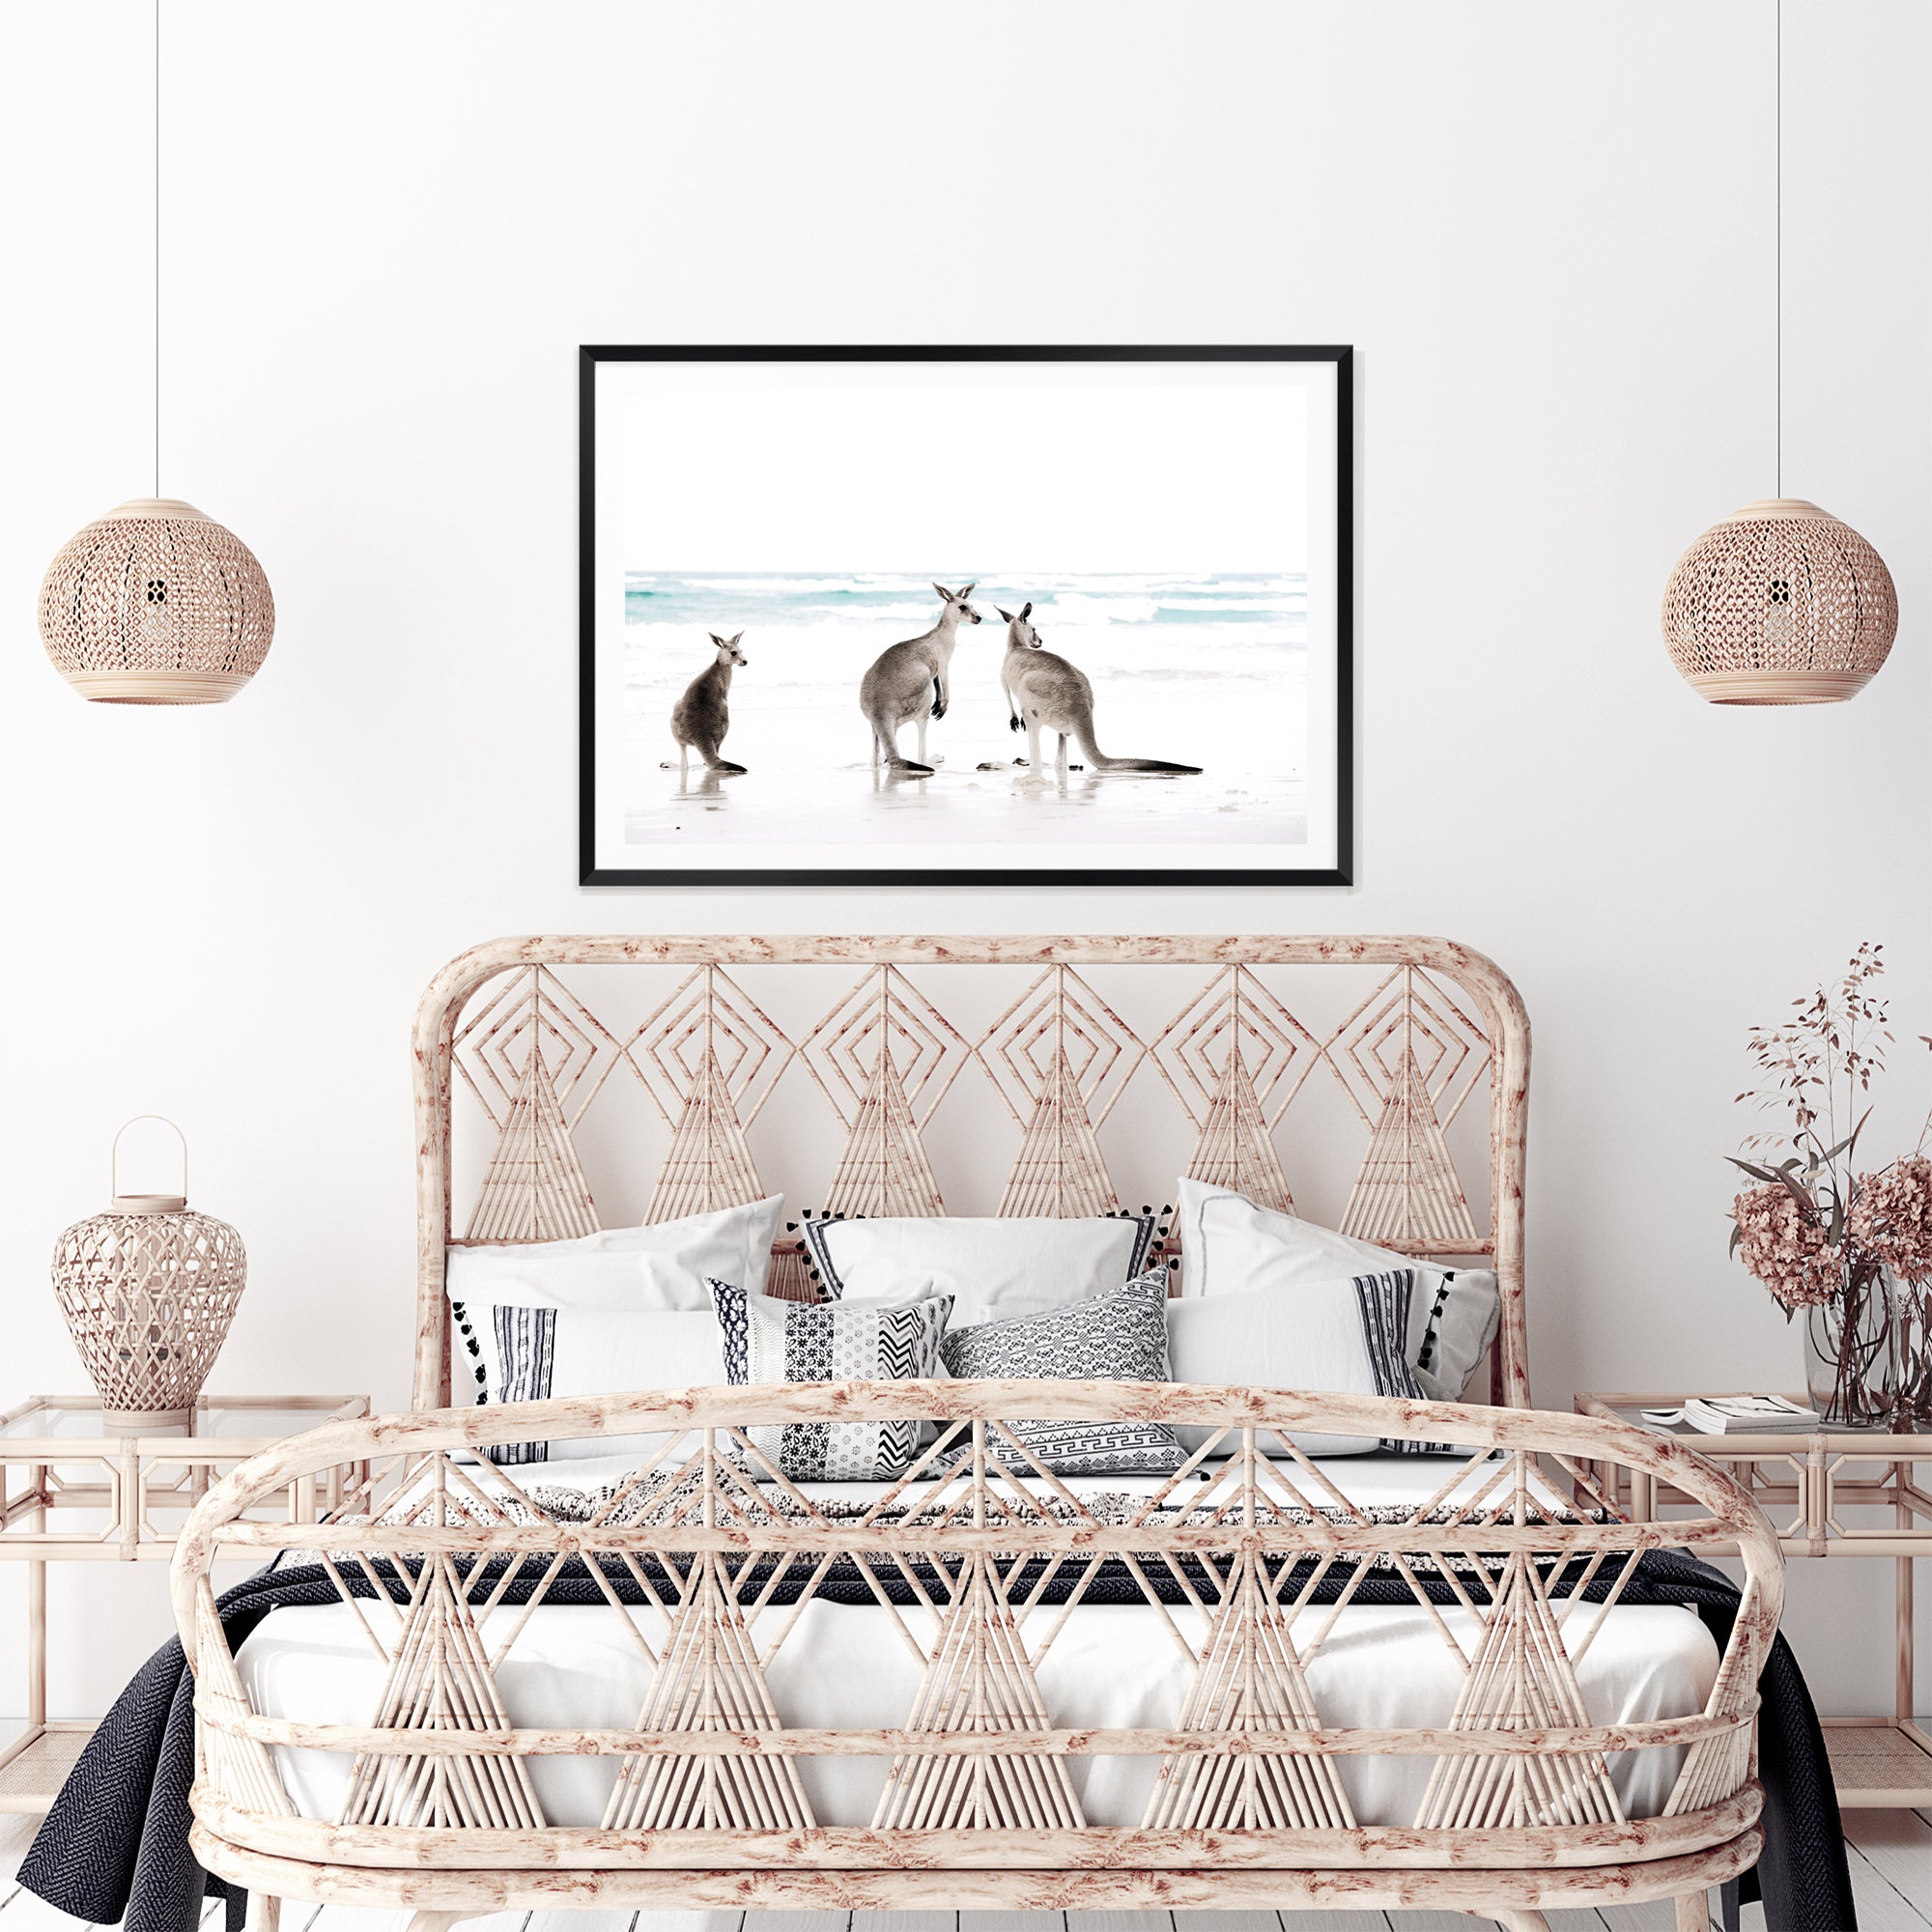 Stretched canvas artwork of three kangaroos enjoying some time on the beach, available in natural timber, black or white frames.